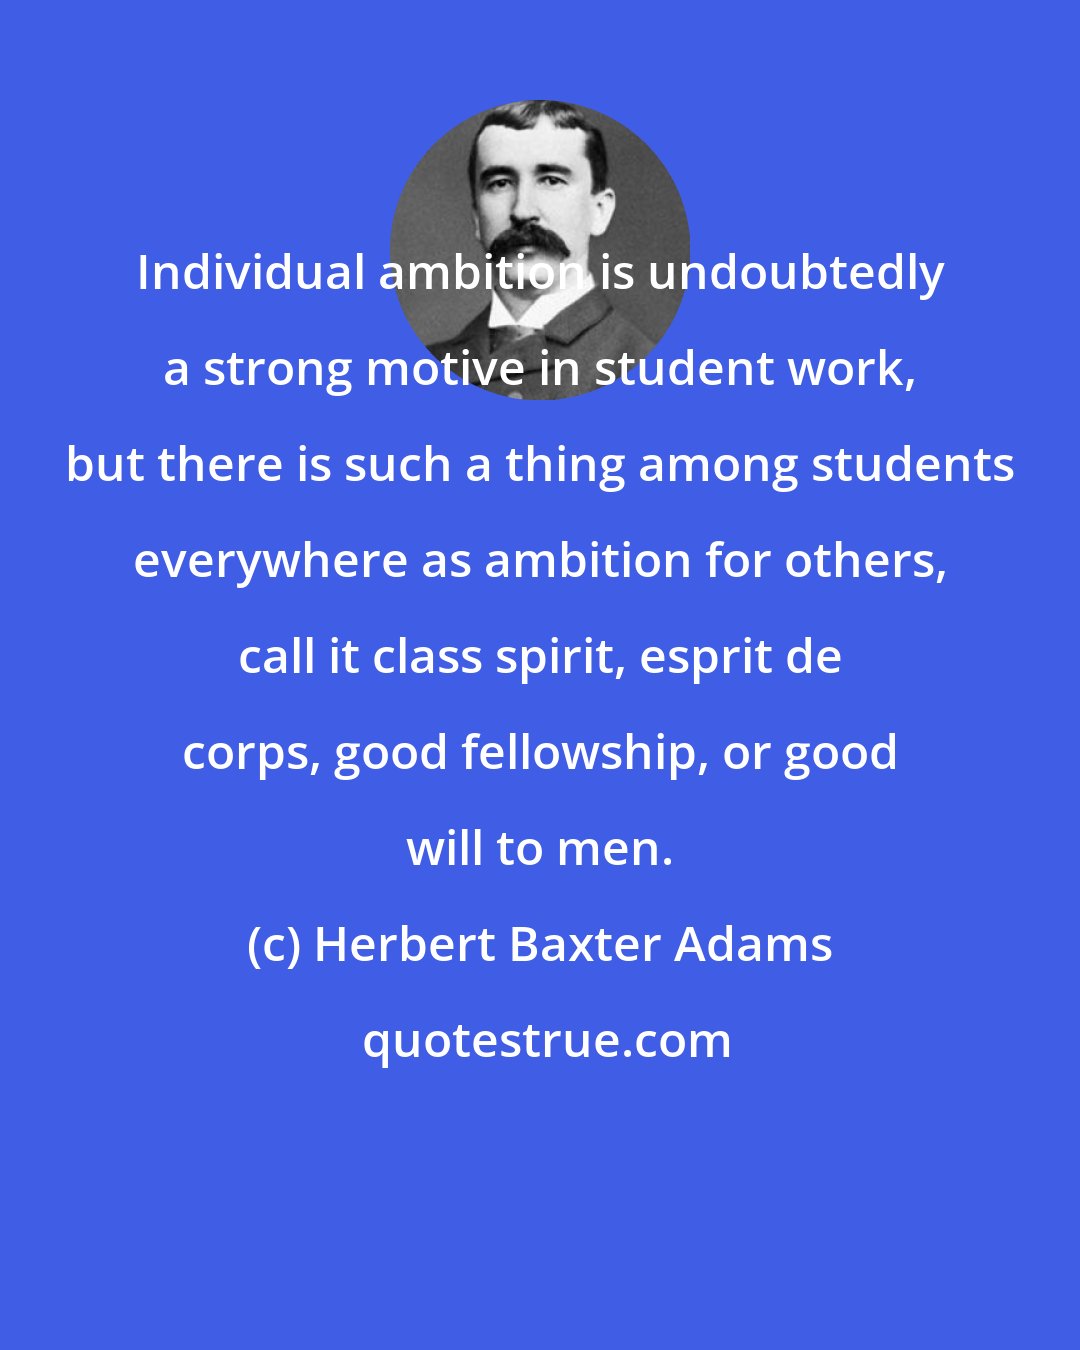 Herbert Baxter Adams: Individual ambition is undoubtedly a strong motive in student work, but there is such a thing among students everywhere as ambition for others, call it class spirit, esprit de corps, good fellowship, or good will to men.